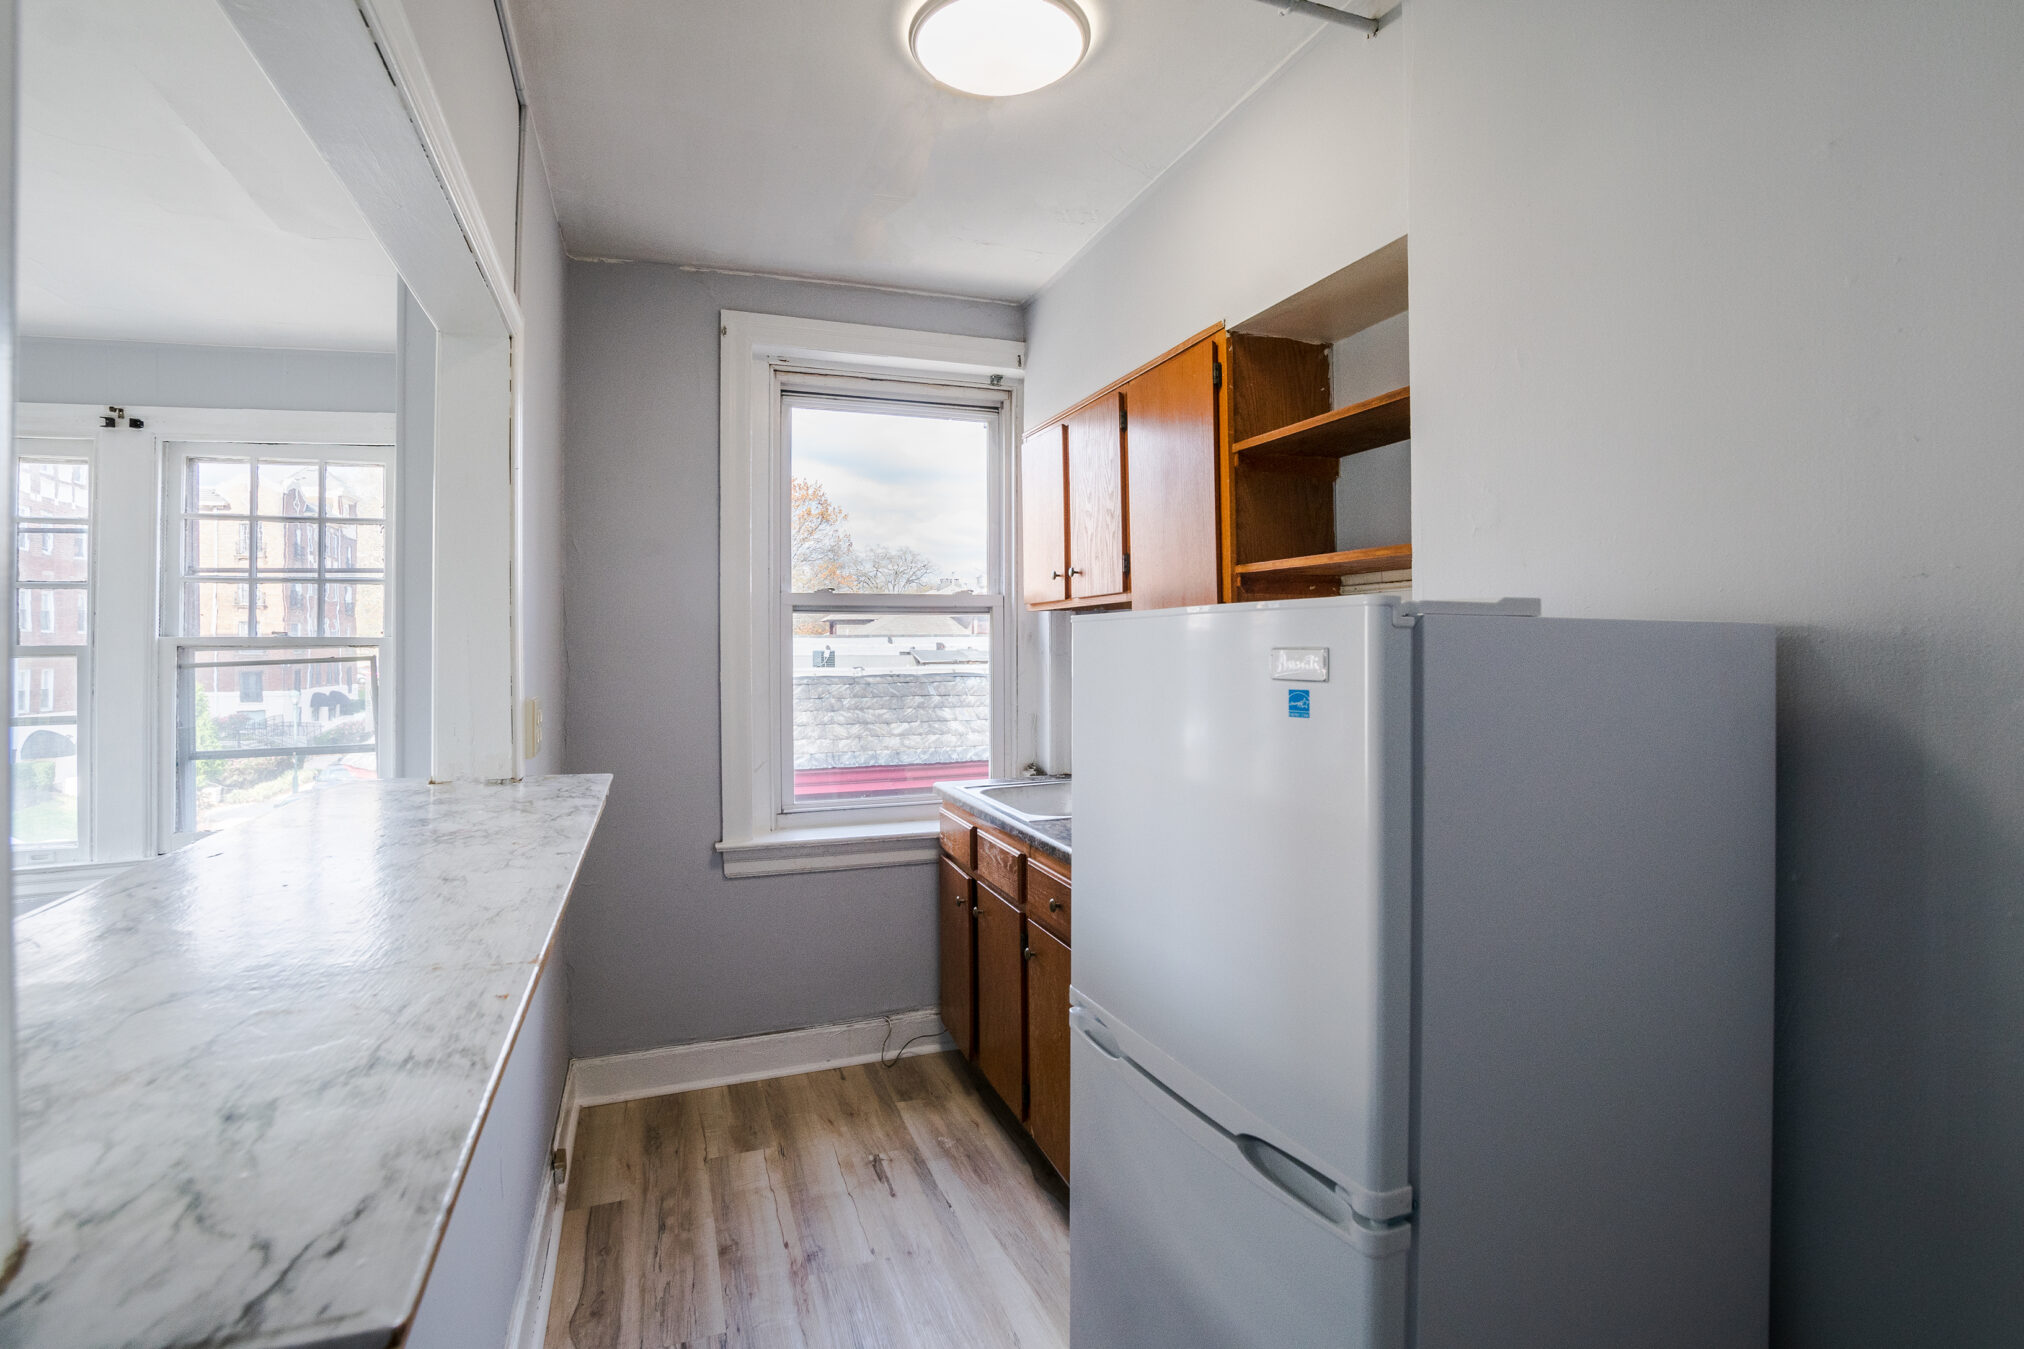 Property Photo For 2115 N. 63rd St, Unit 3A